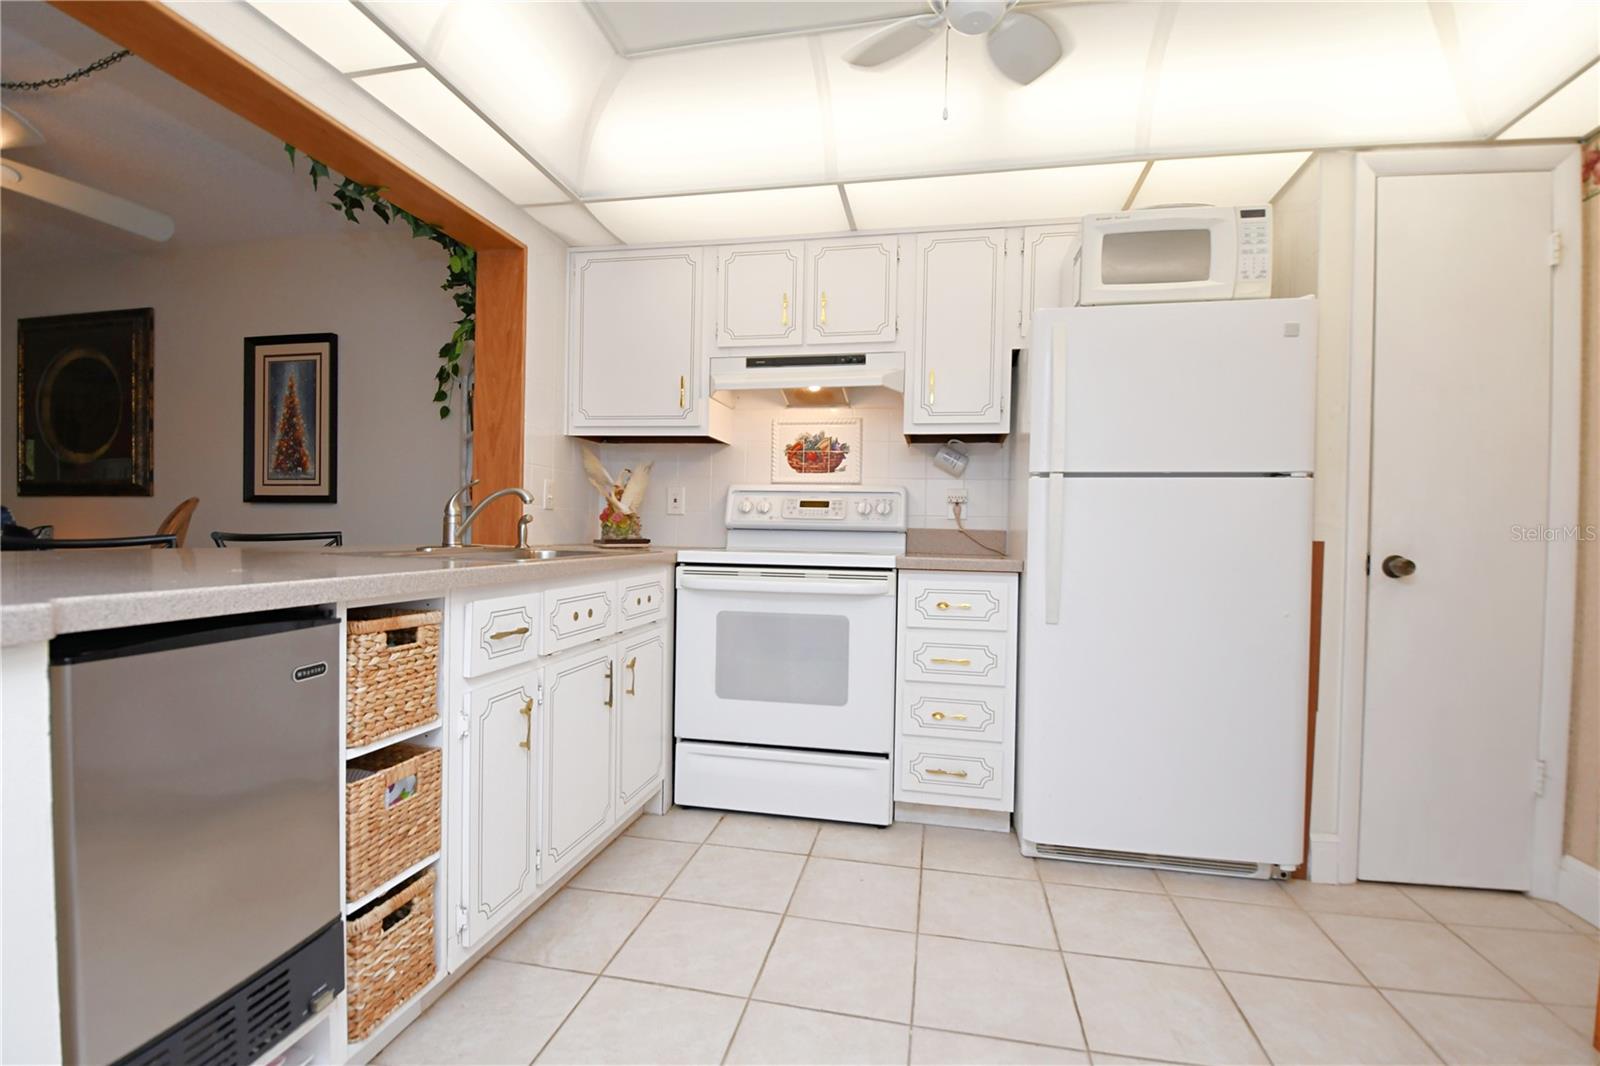 It also features a new extra large stainless steel ice maker, and ample cabinets featuring unique utensil hardware.